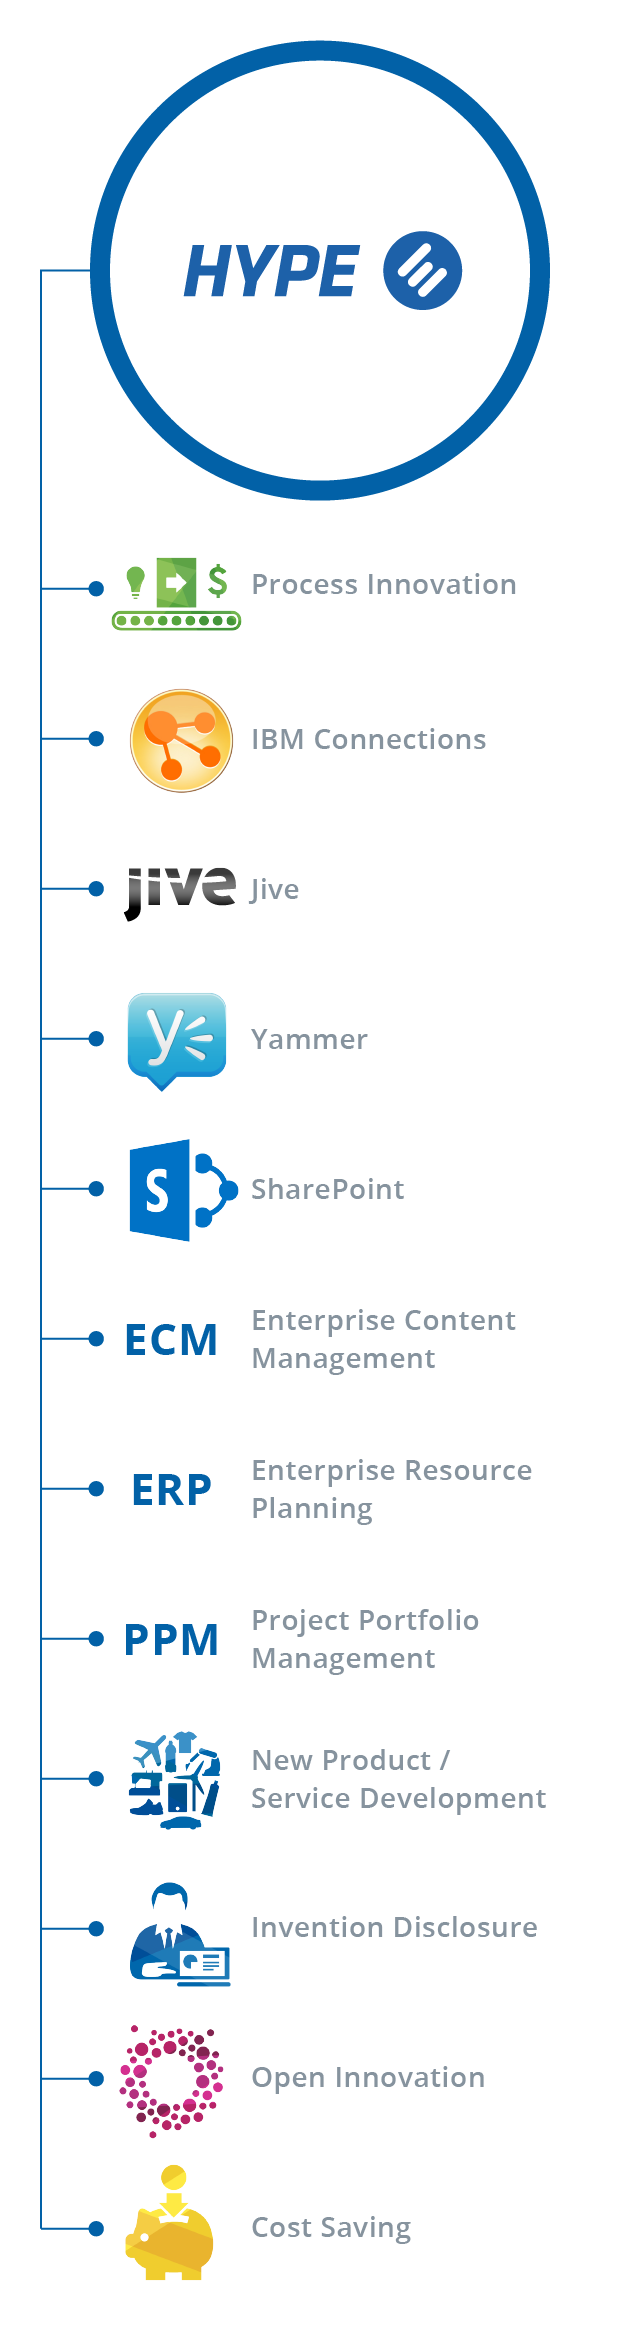 HYPE's areas of innovation